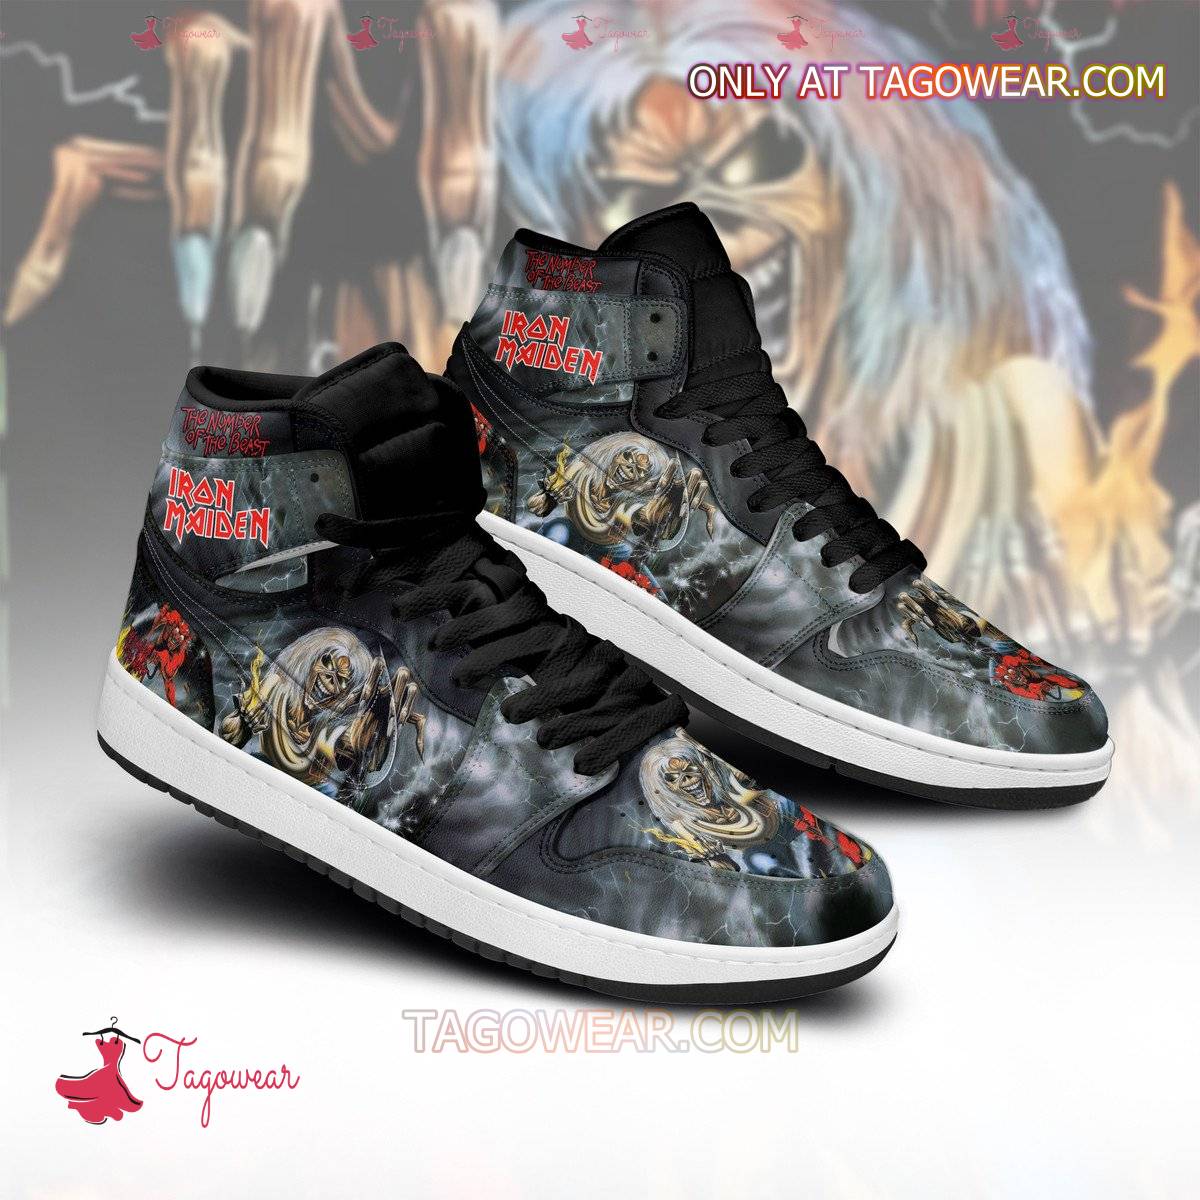 Iron Maiden The Number Of The Beast Air Jordan High Top Shoes a